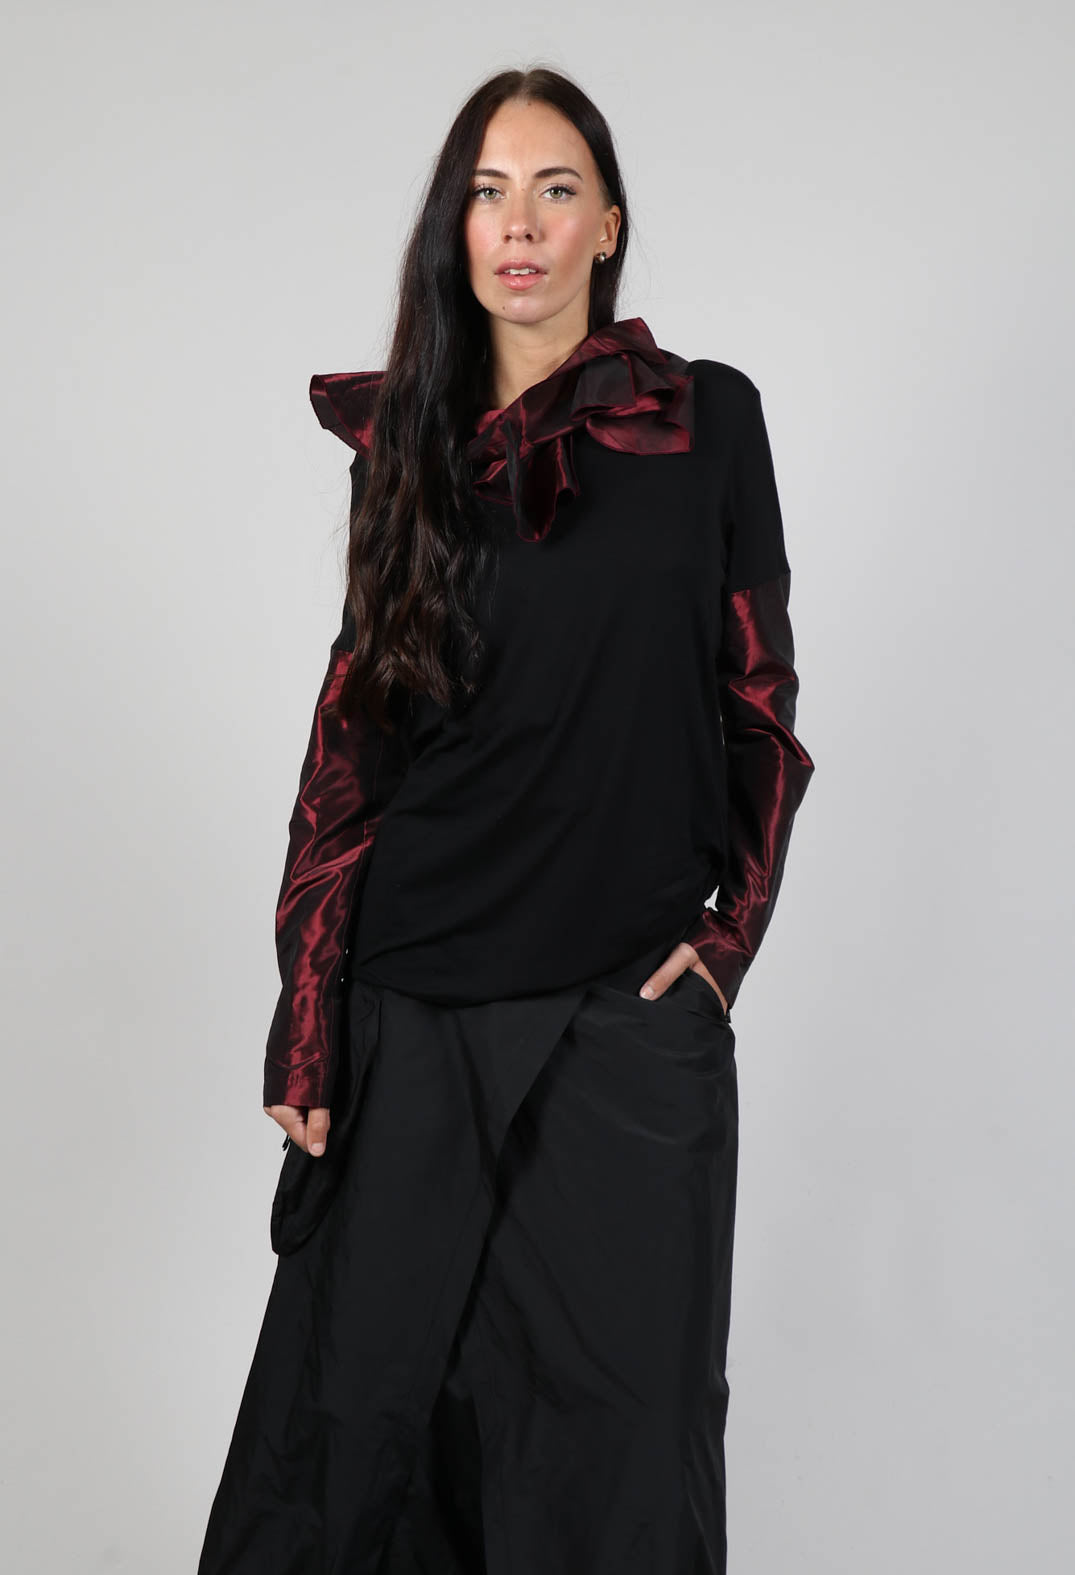 Jersey Top with Contrasting Sleeves and Neck in Black and Burgundy